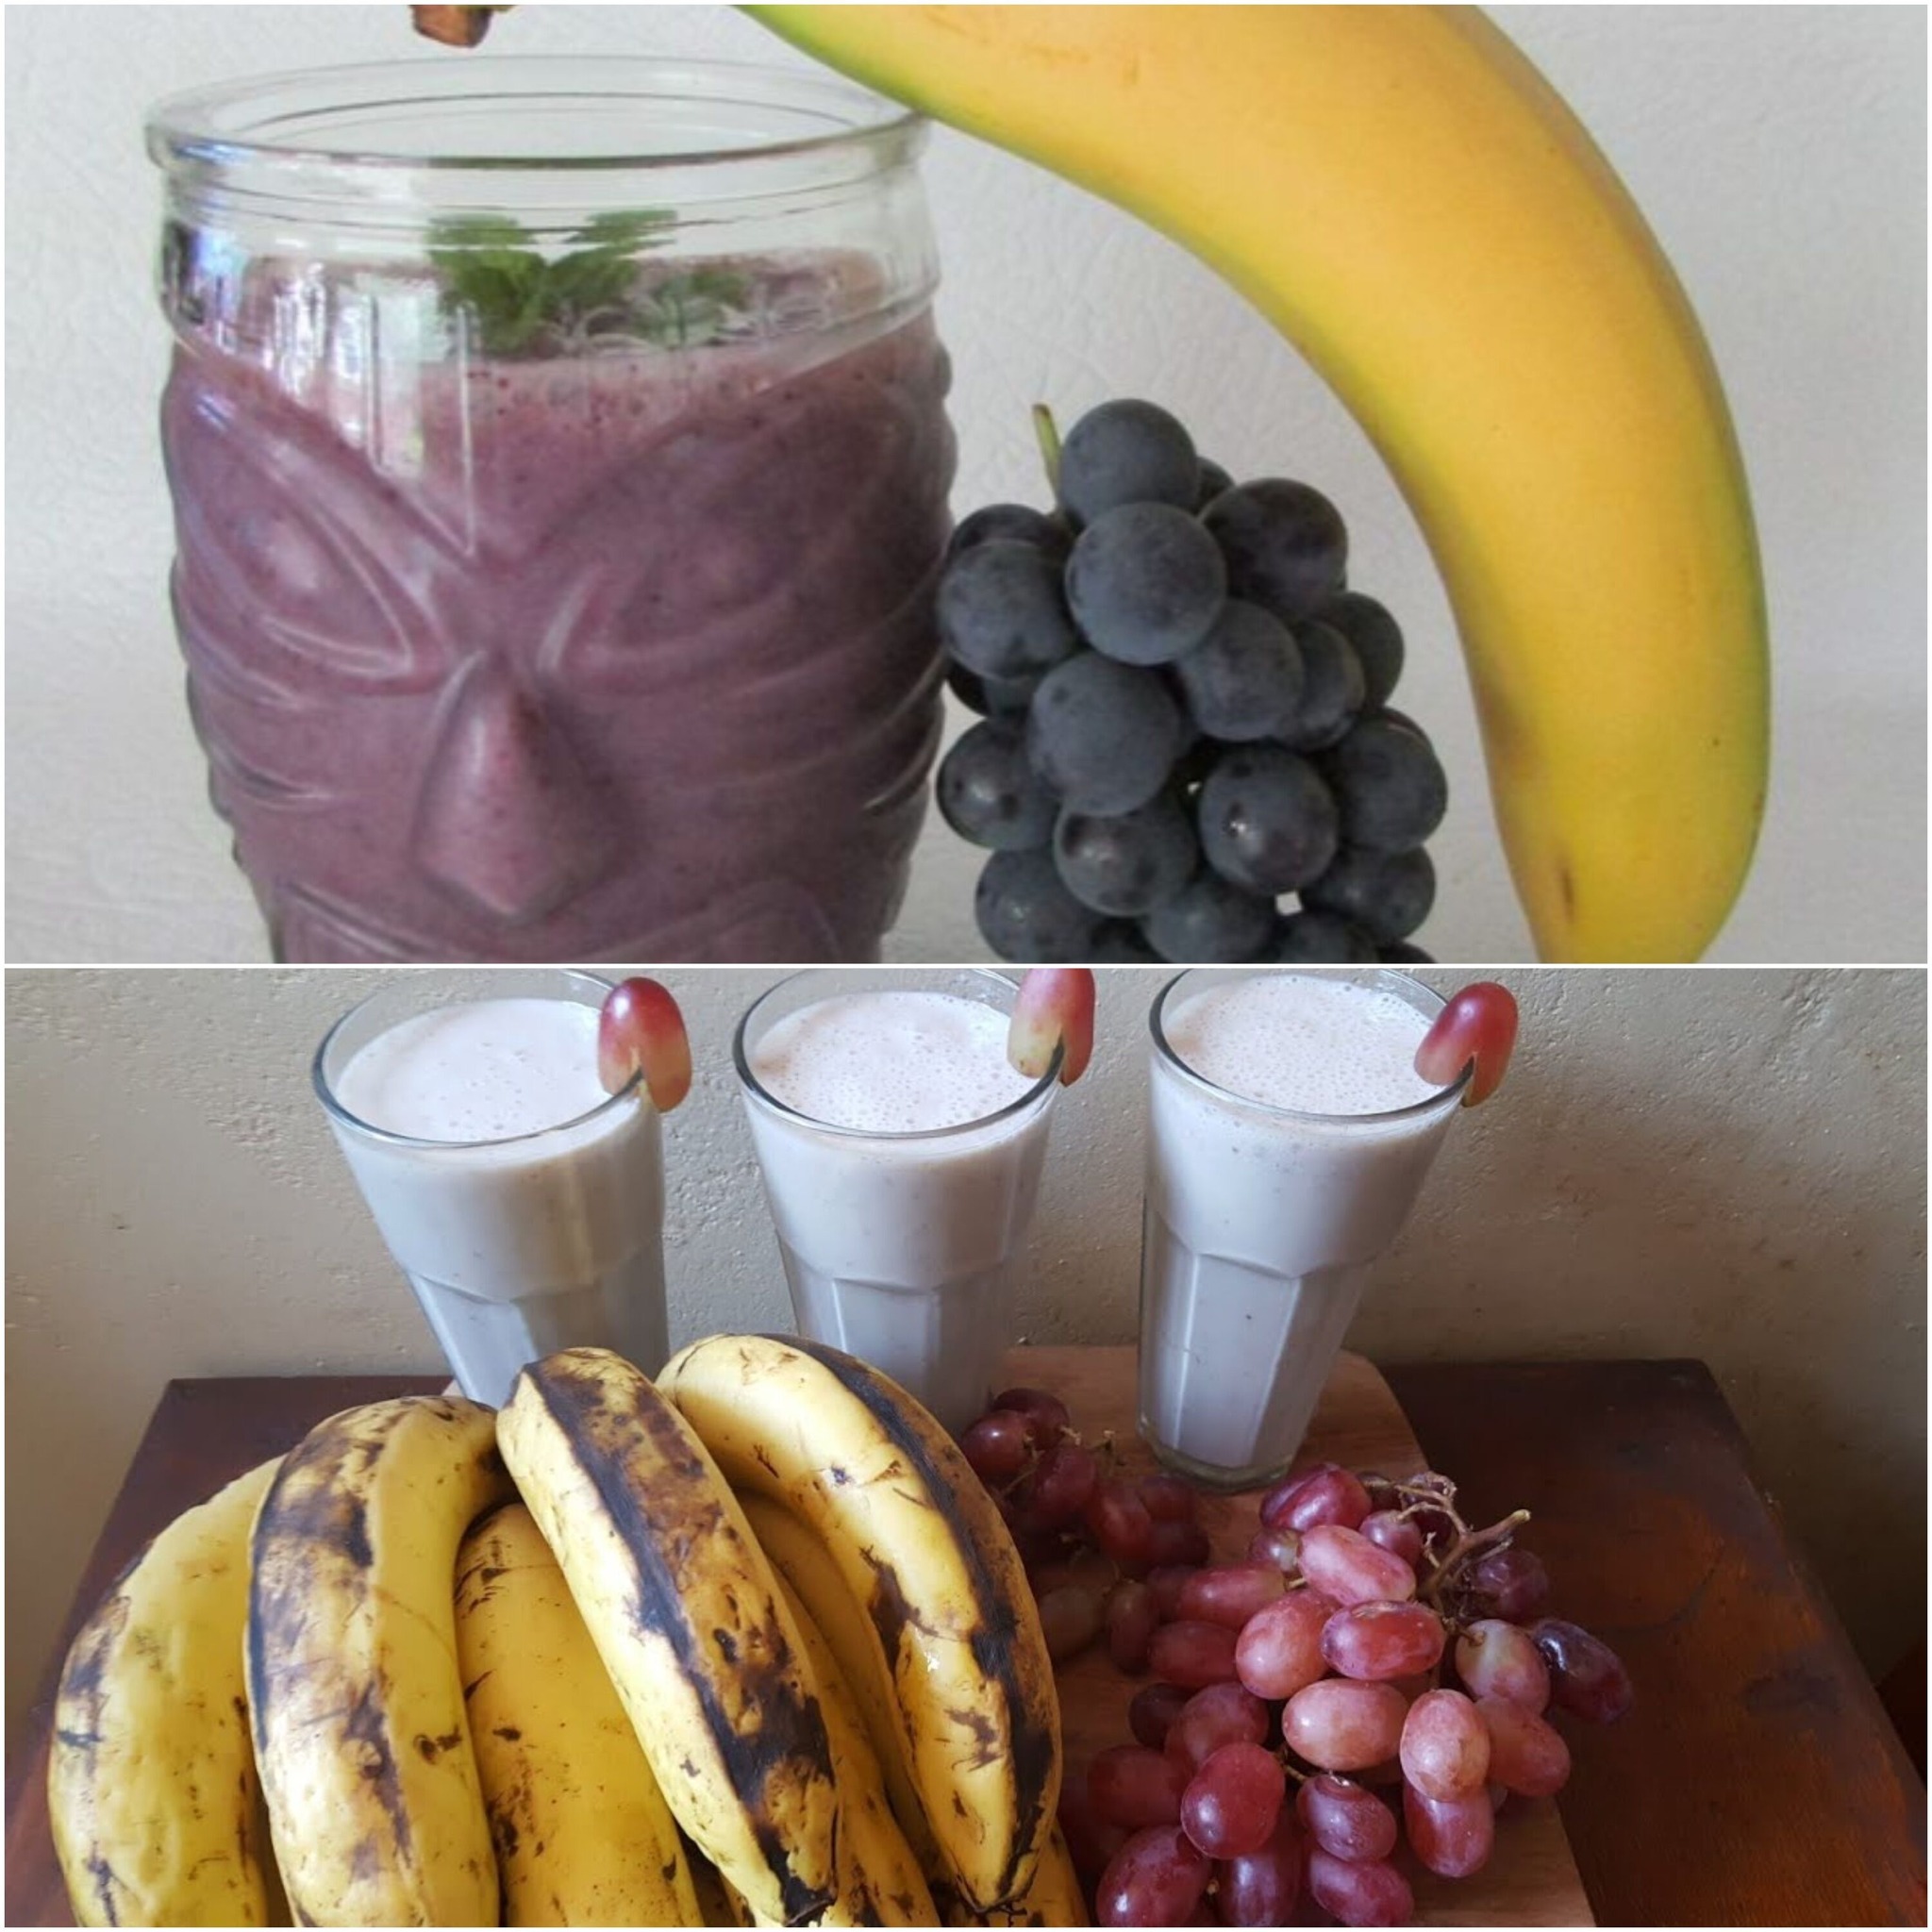 Savor the Sweetness of Seedless Grapes and Banana in This Refreshing Smoothie